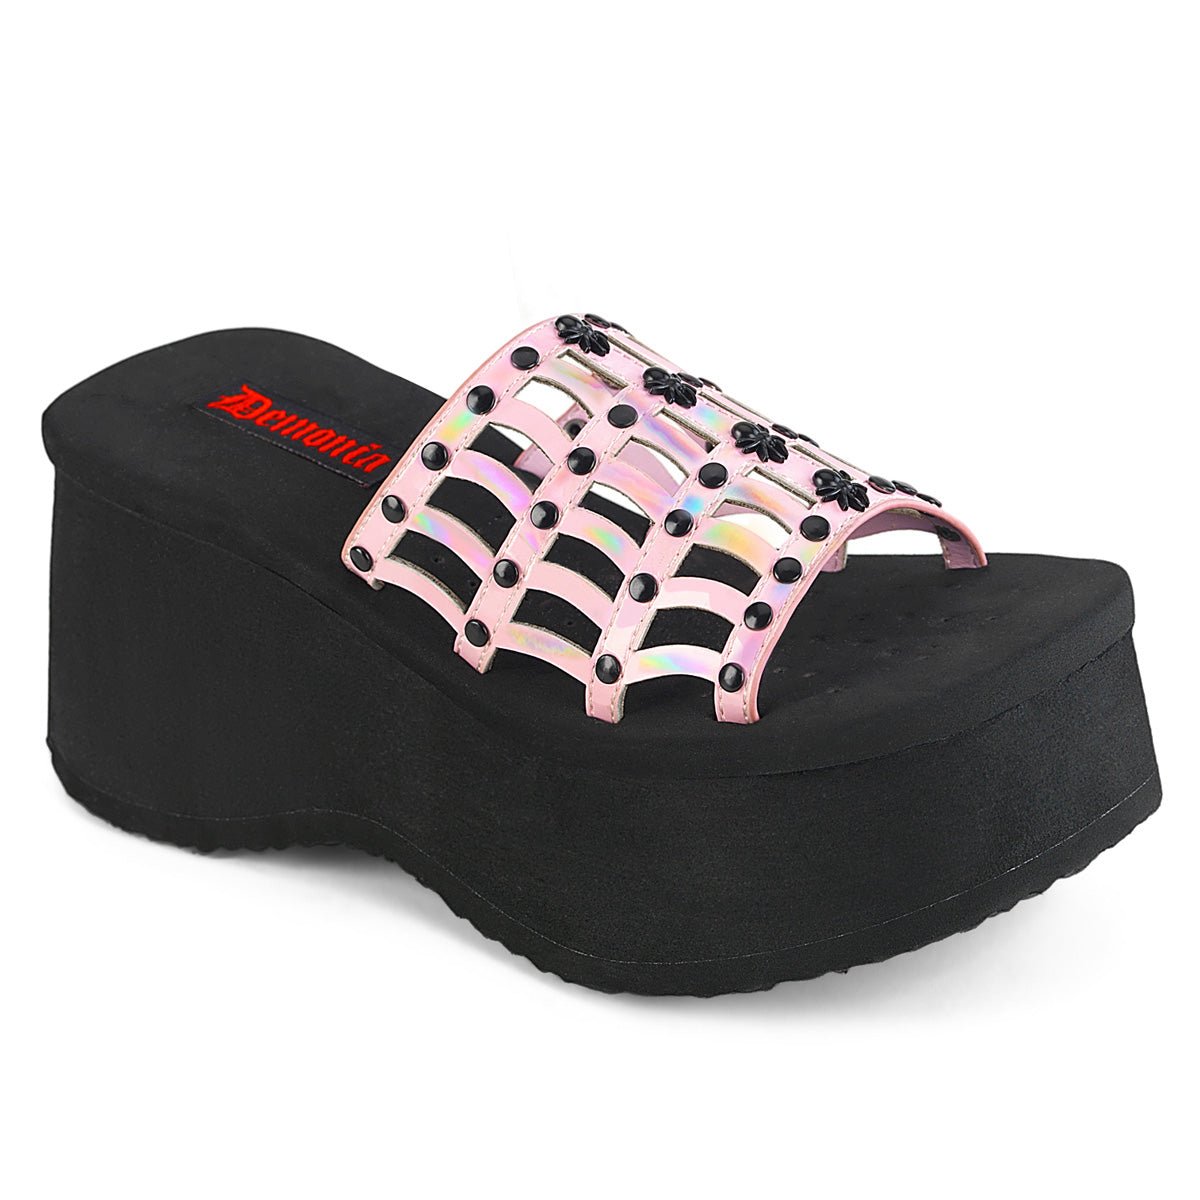 Too Fast | Demonia Funn 13 | Baby Pink Hologram Patent Women's Sandals